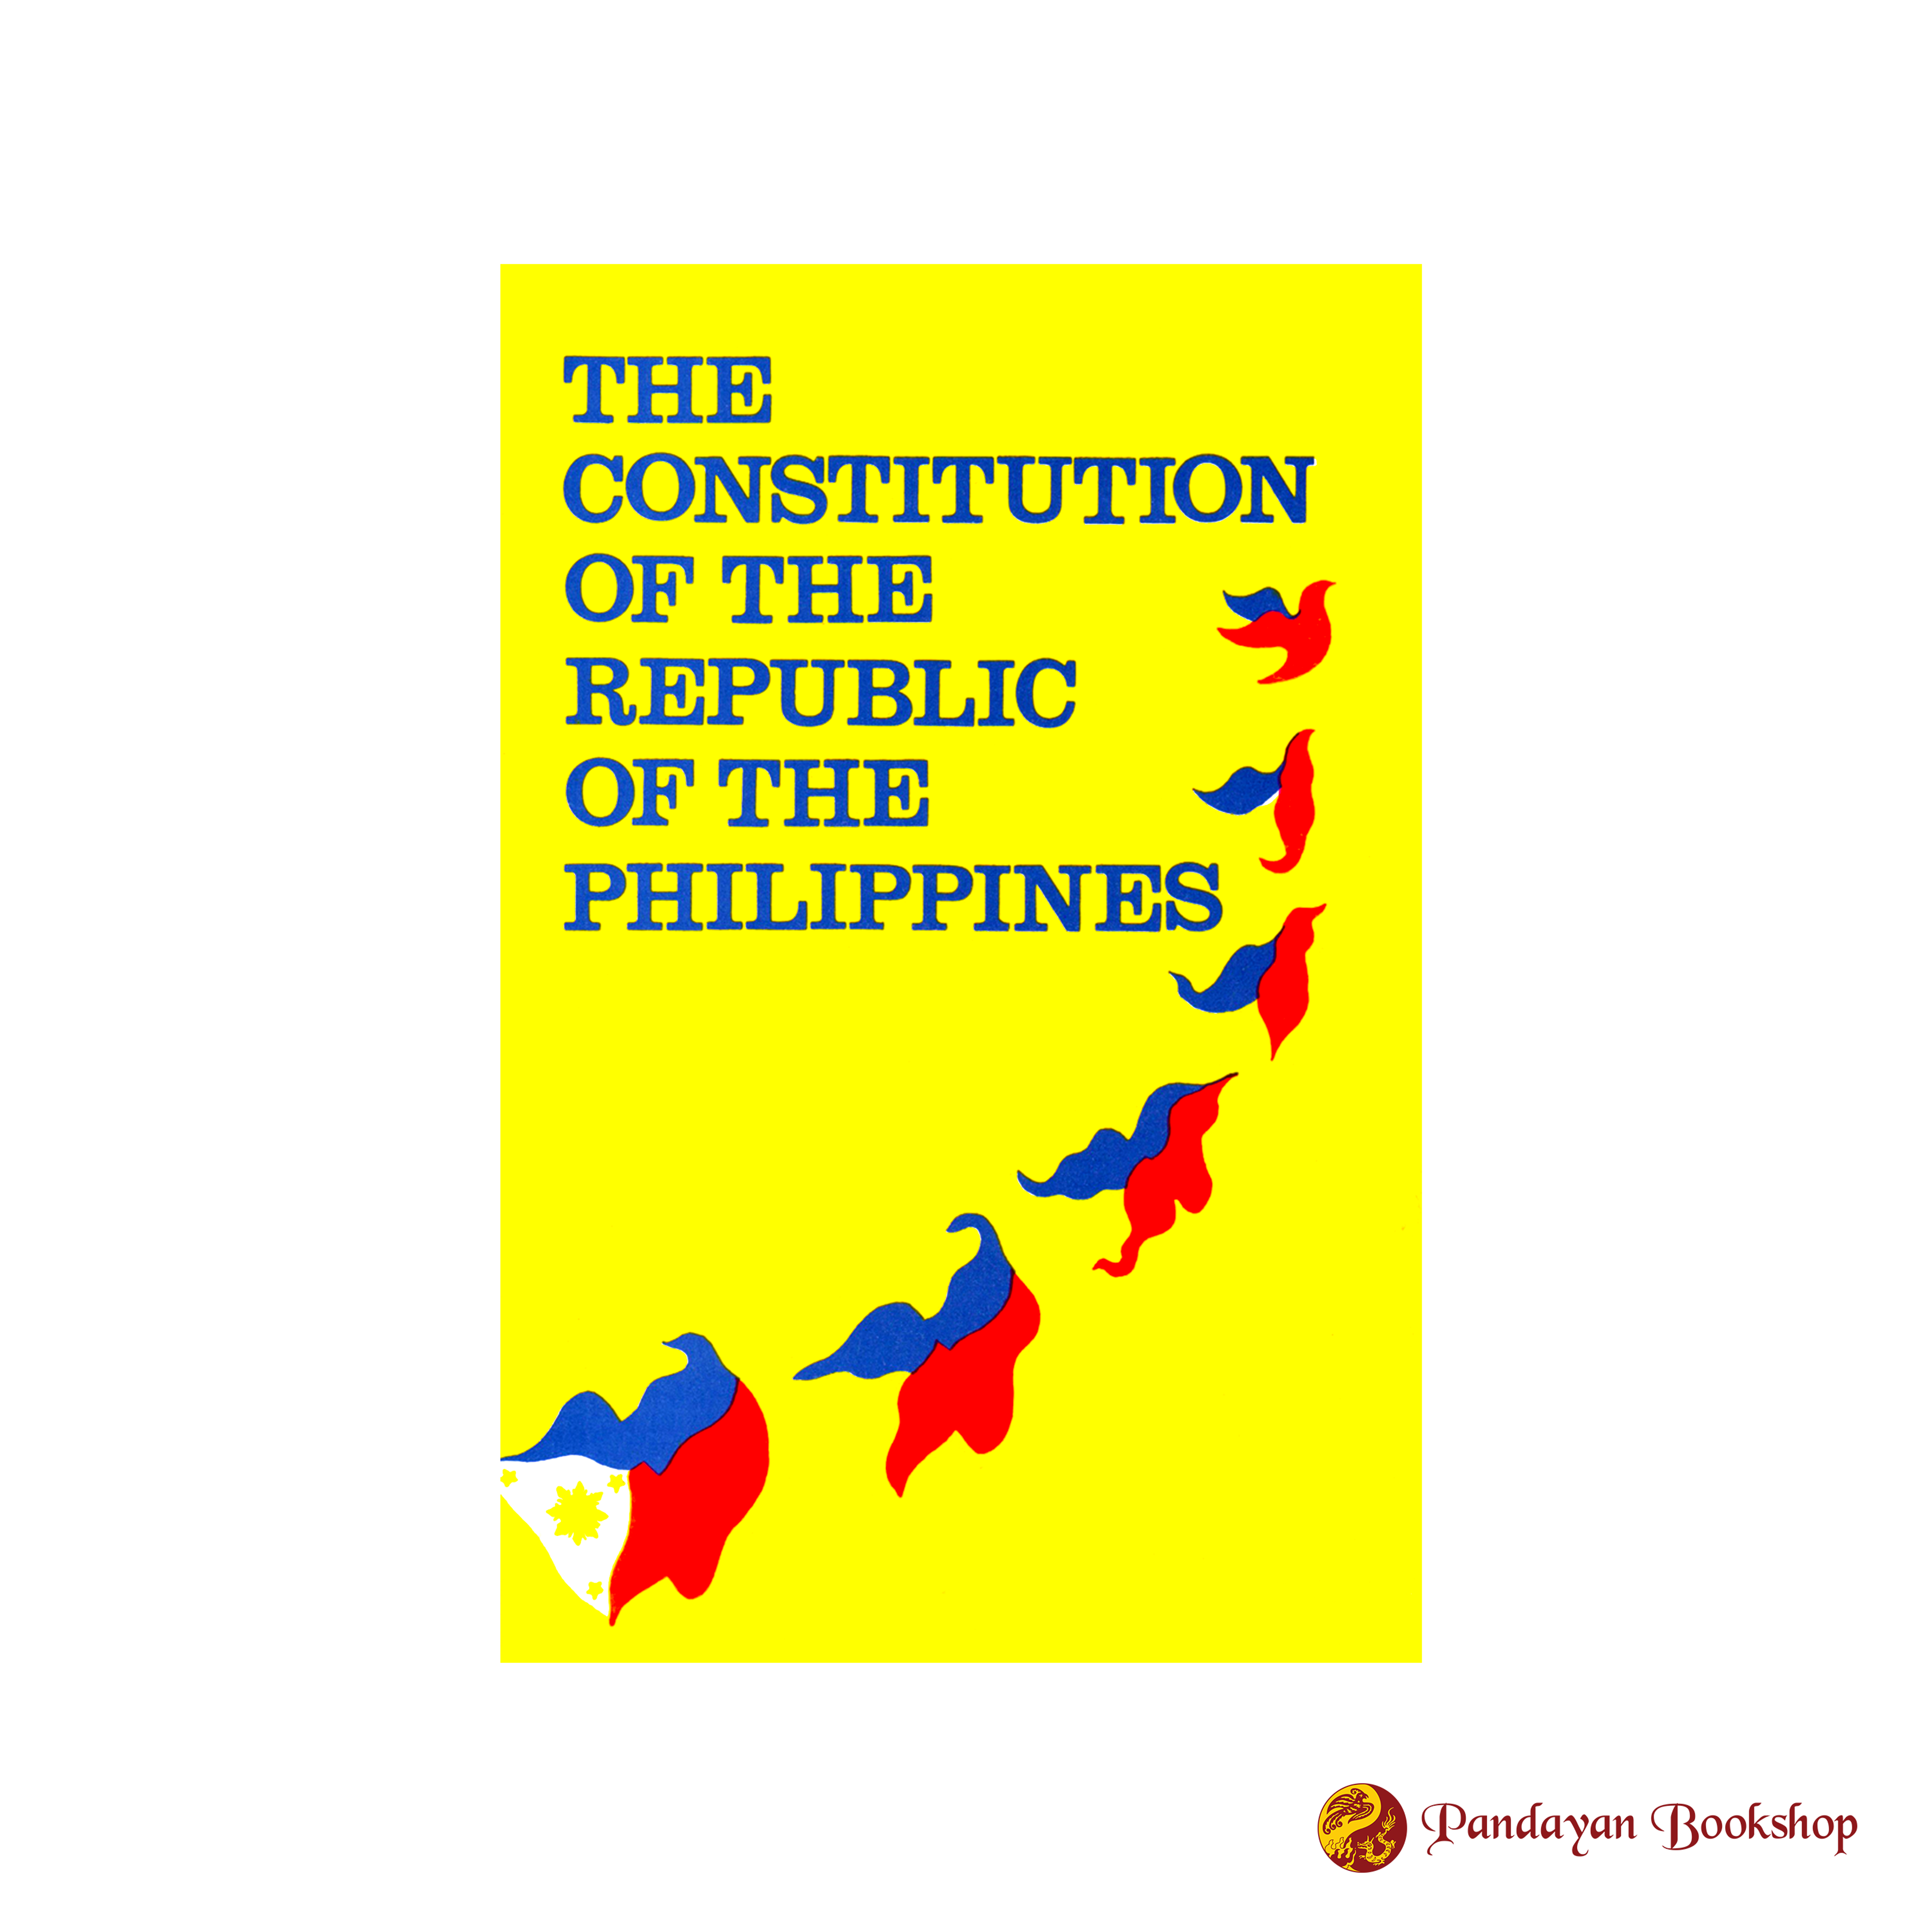 The Constitution of the Republic of the Philippine